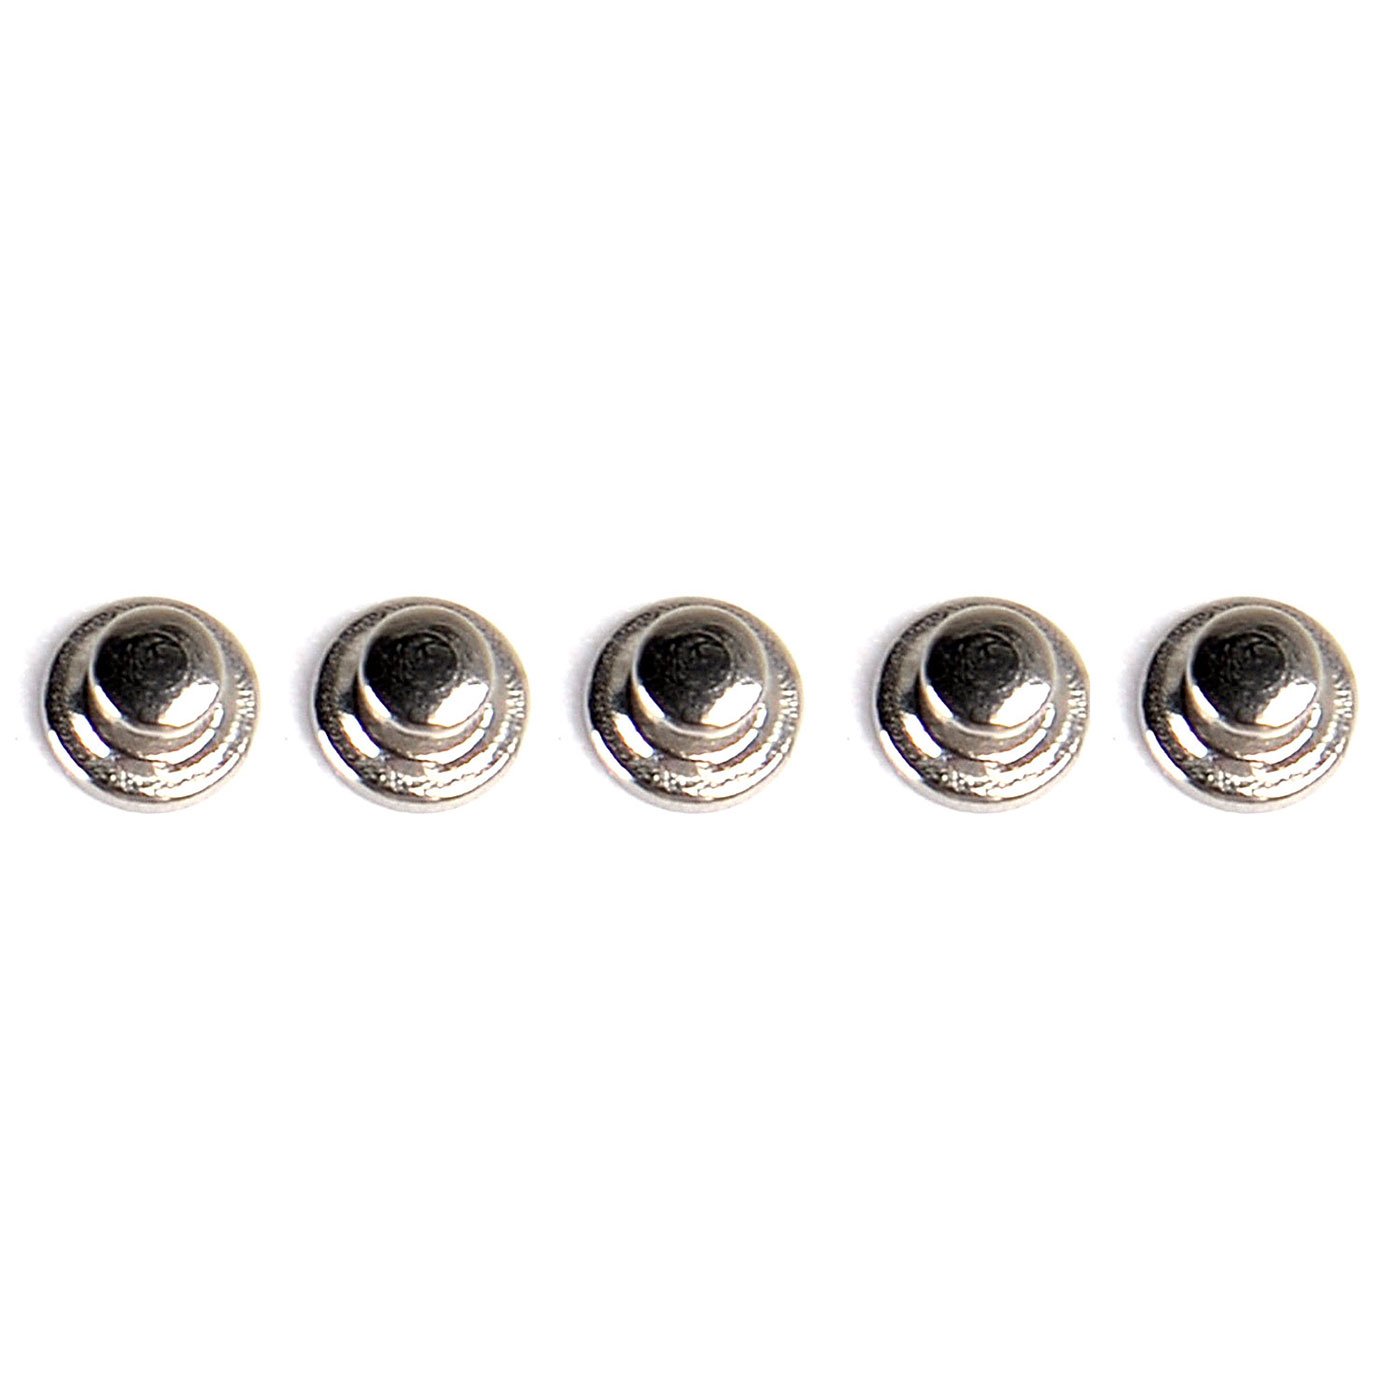 AZDENT Dental Lingual Button Bondable Stainless Steel Round Base 10/Bag